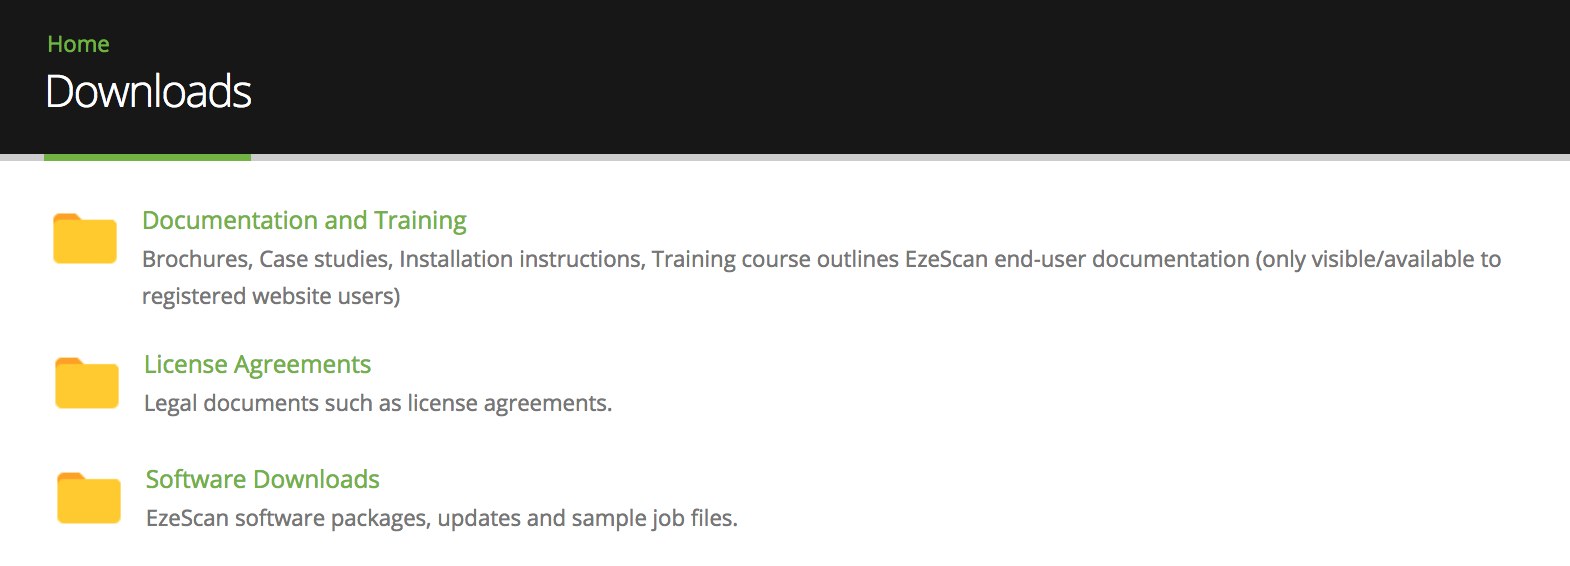 Ezescan-FAQ-Downloading-an-evaluation-version-of-EzeScan-Image5.png